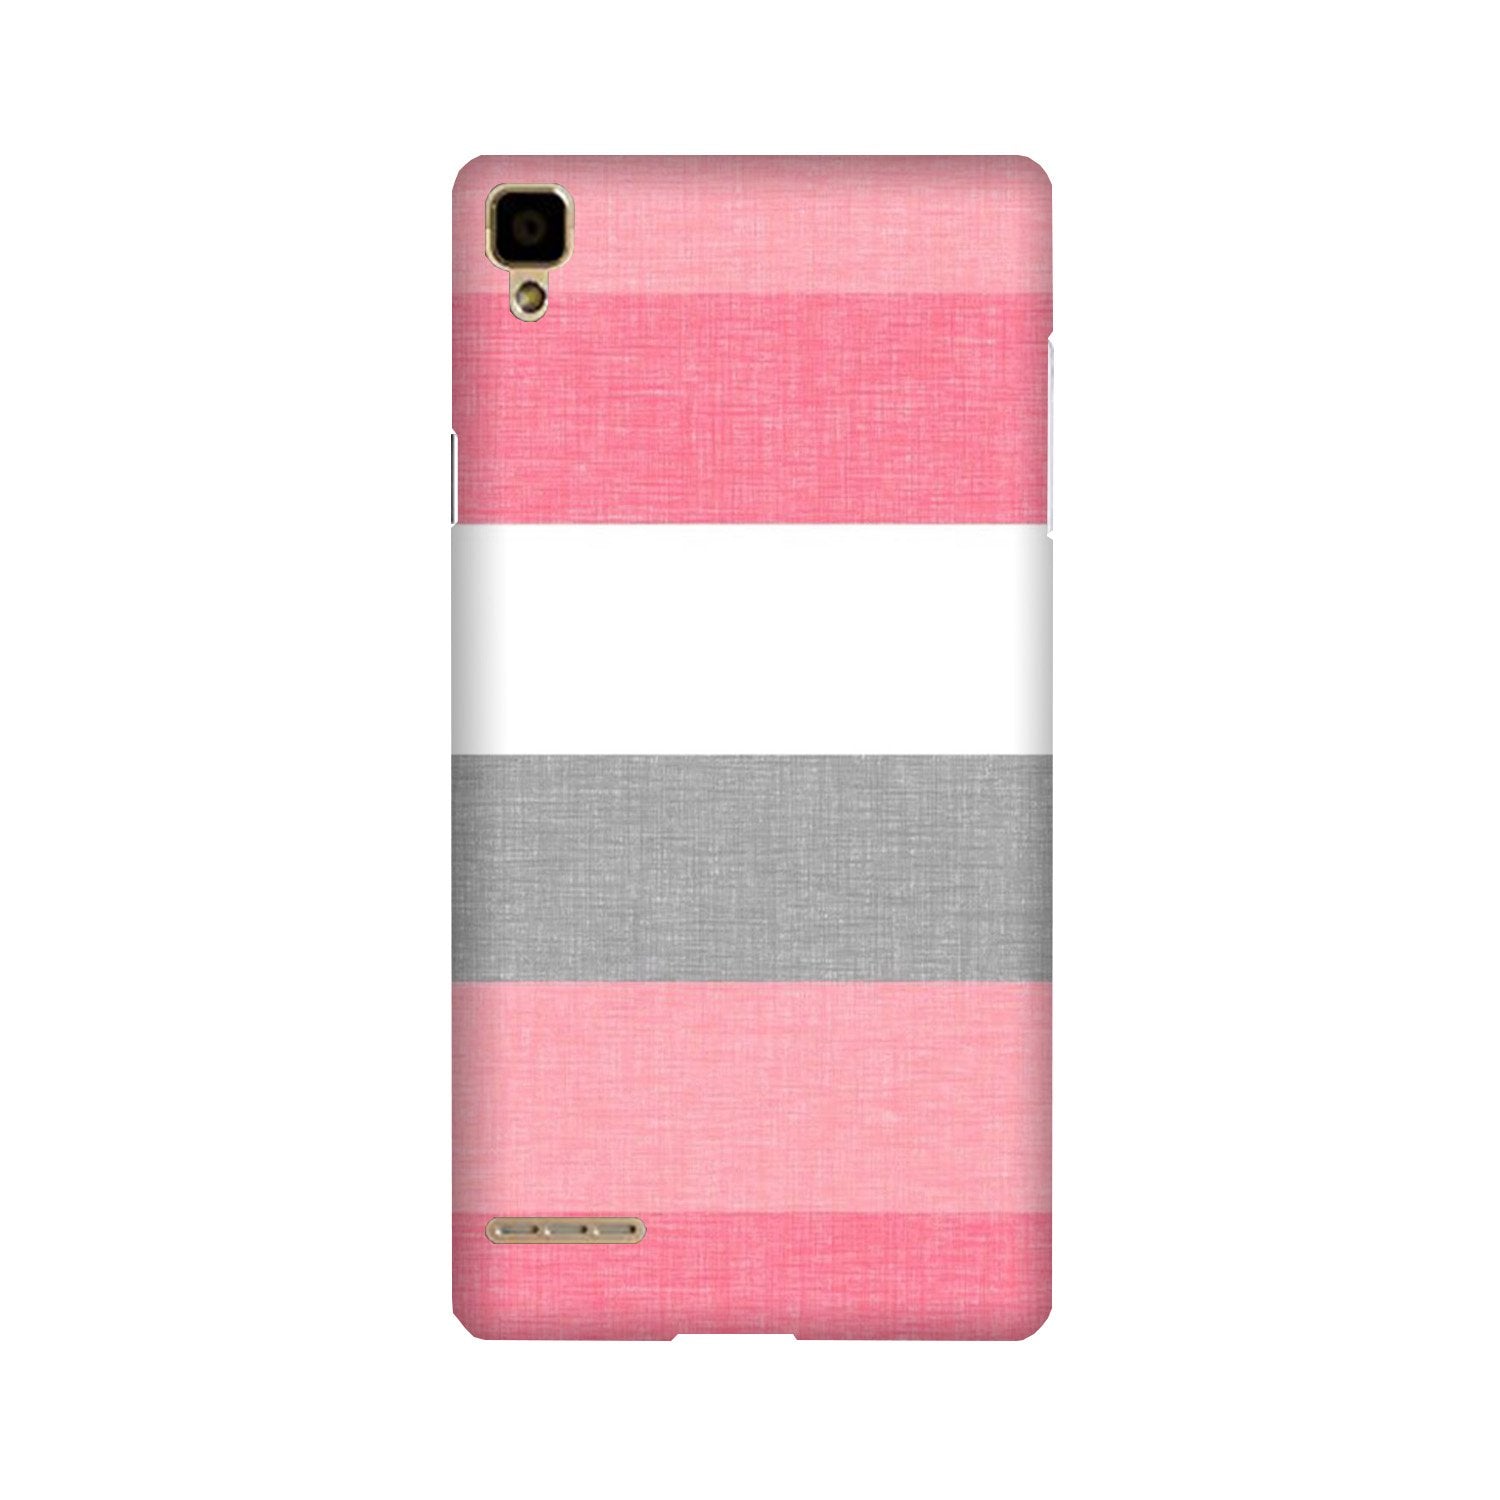 Pink white pattern Case for Oppo F1